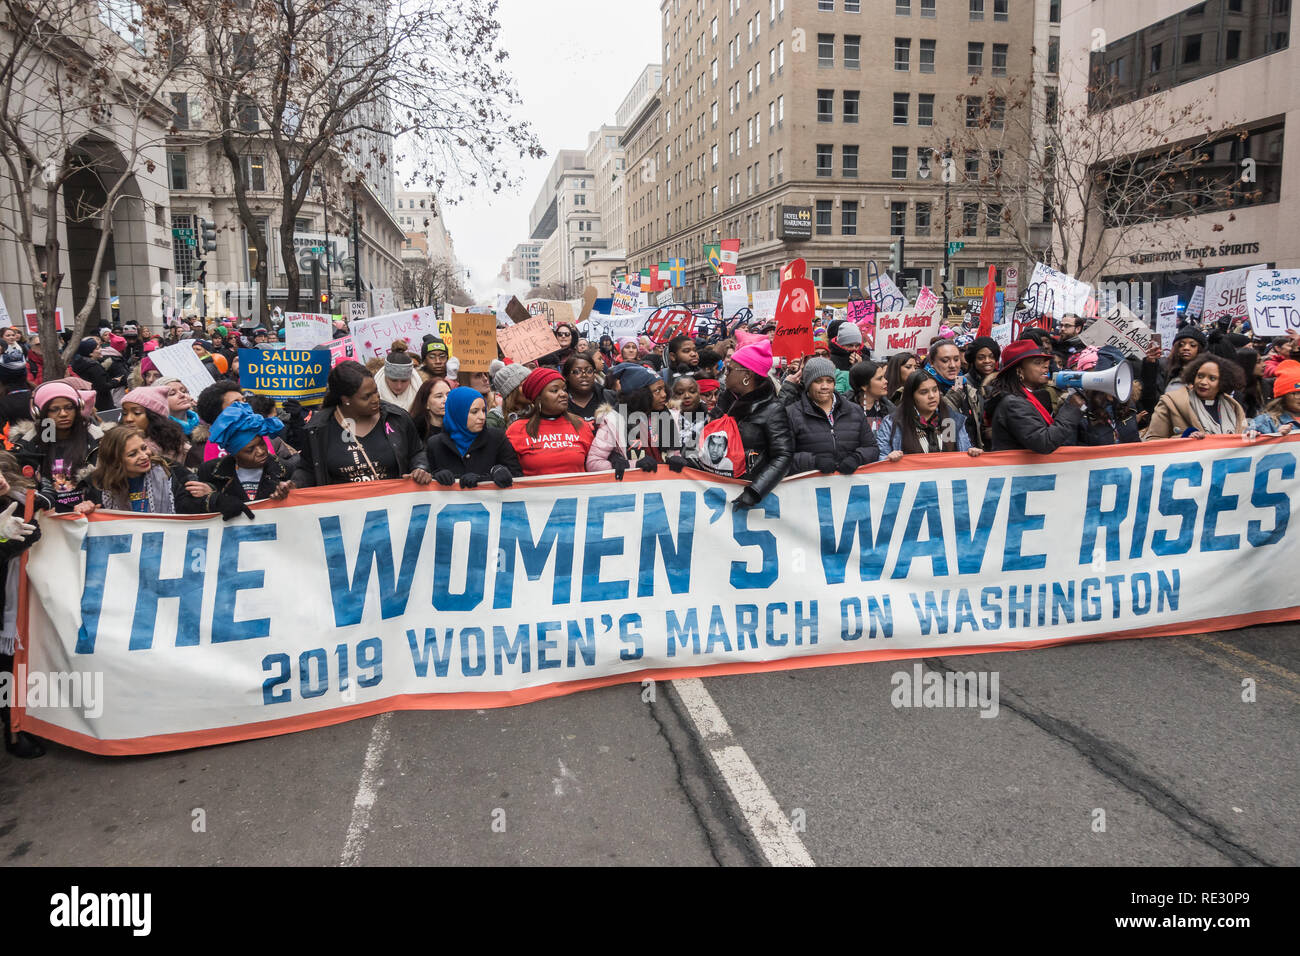 Washington, DC, USA. 19th January, 2019. Thousands of demonstrators marched and rallied in Washington, DC in the 2019 Women’s March on Washington, a vociferous protest against President Donald Trump, and a celebration of the women elected to congress in November.  Bob Korn/Alamy Live News Stock Photo